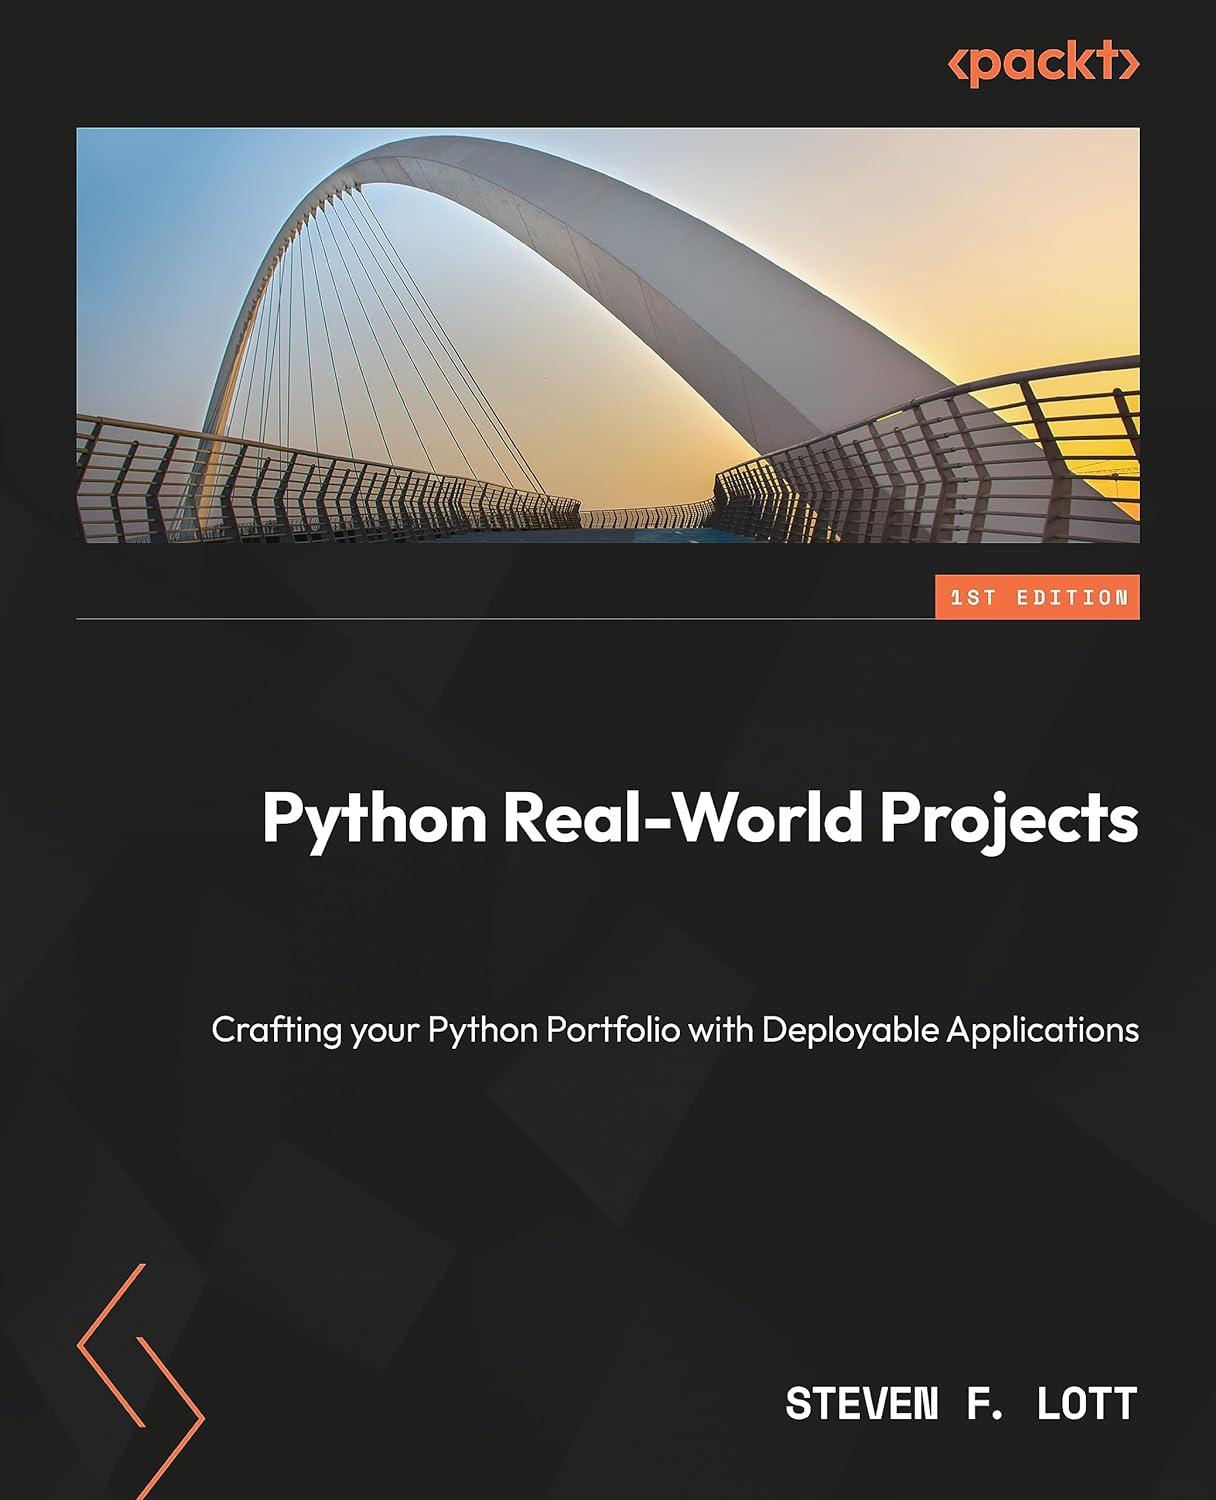 python real world projects craft your python portfolio with deployable applications 1st edition steven f.